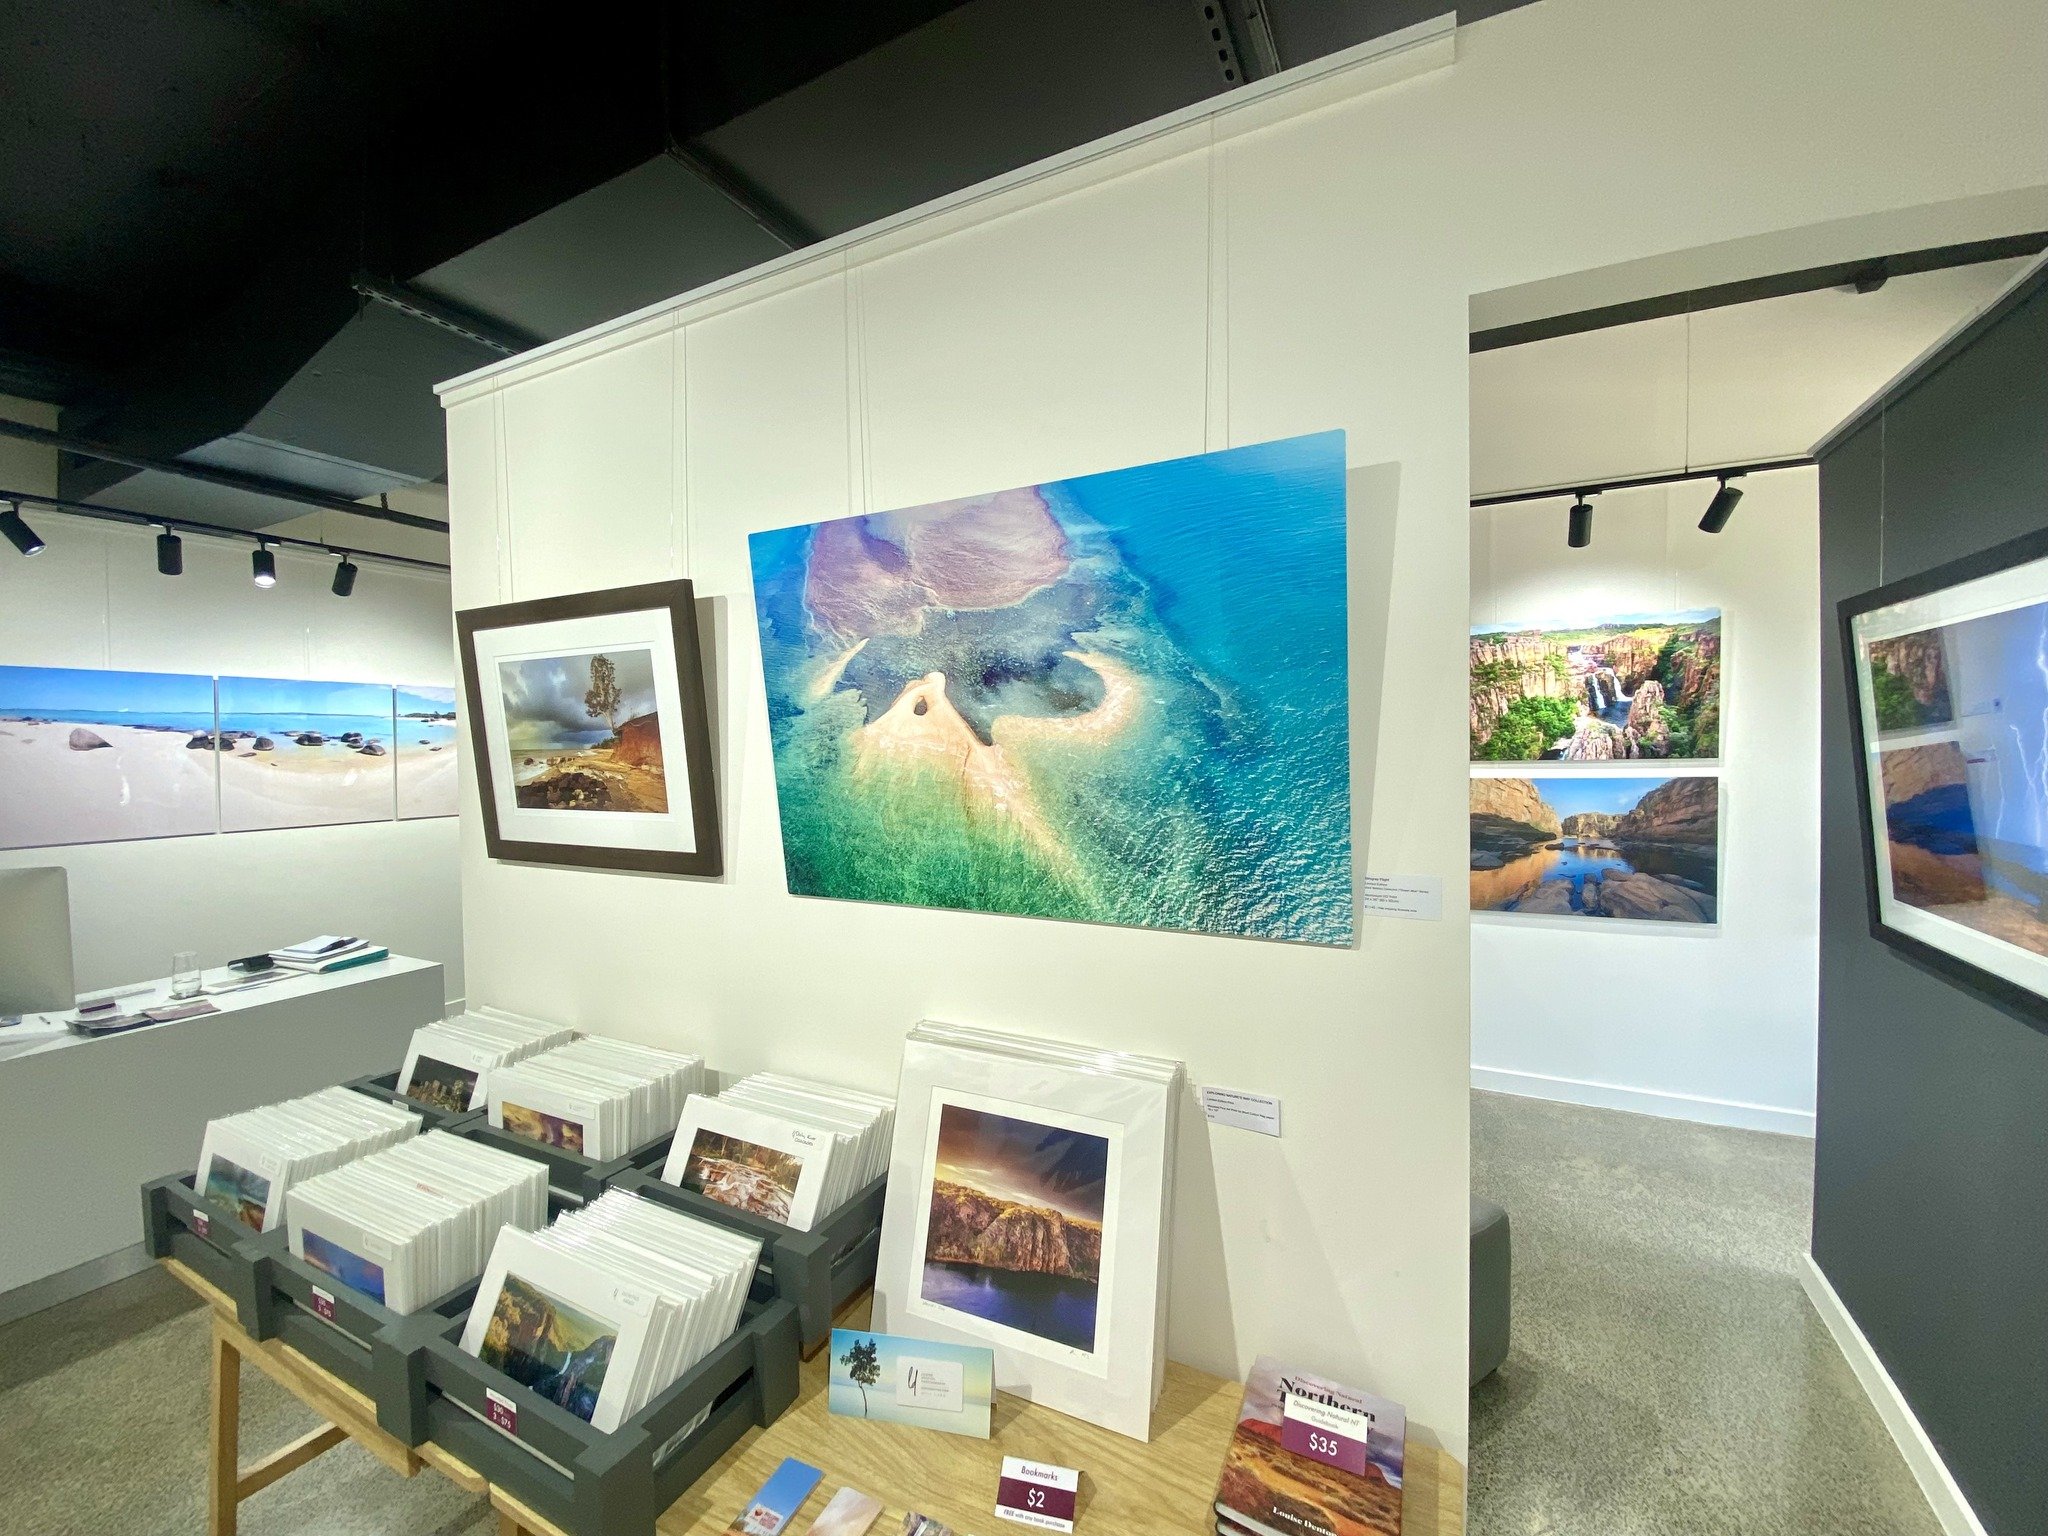 Still need something special for Mum for Mother's Day tomorrow? 

We have plenty of beautiful Northern Territory landscape photography waiting for a new spot in your home!

Here's a little look at some of our available pieces, you can view more on th